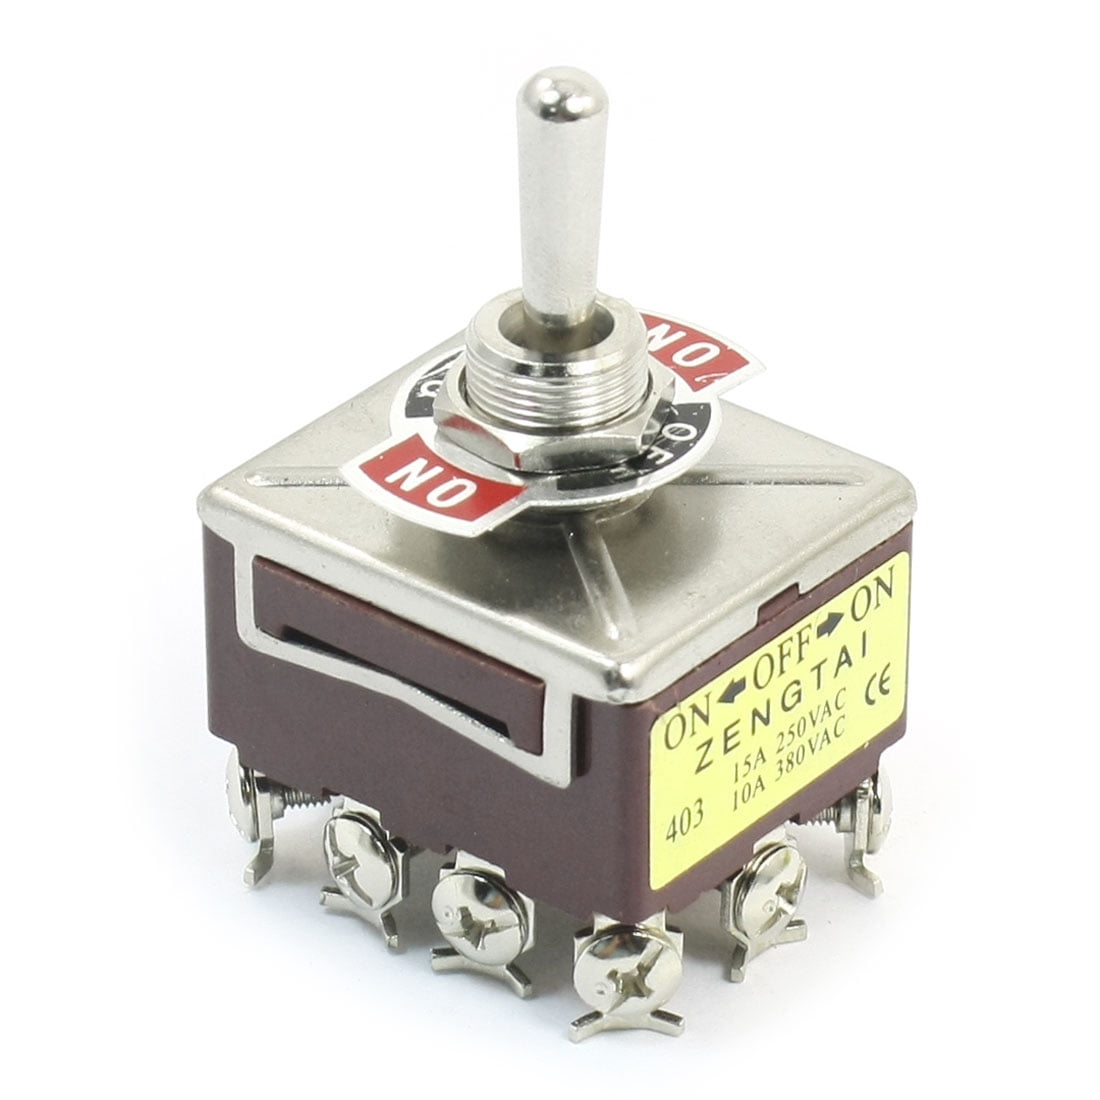 Tnisesm/Heavy Duty Rocker Toggle Switch 3 Position 4PDT 12 Terminal ON/Off/ON 15A 250V 10A 380V Toggle Switches with Metal Knob Cover Cap Waterproof TEN-403 